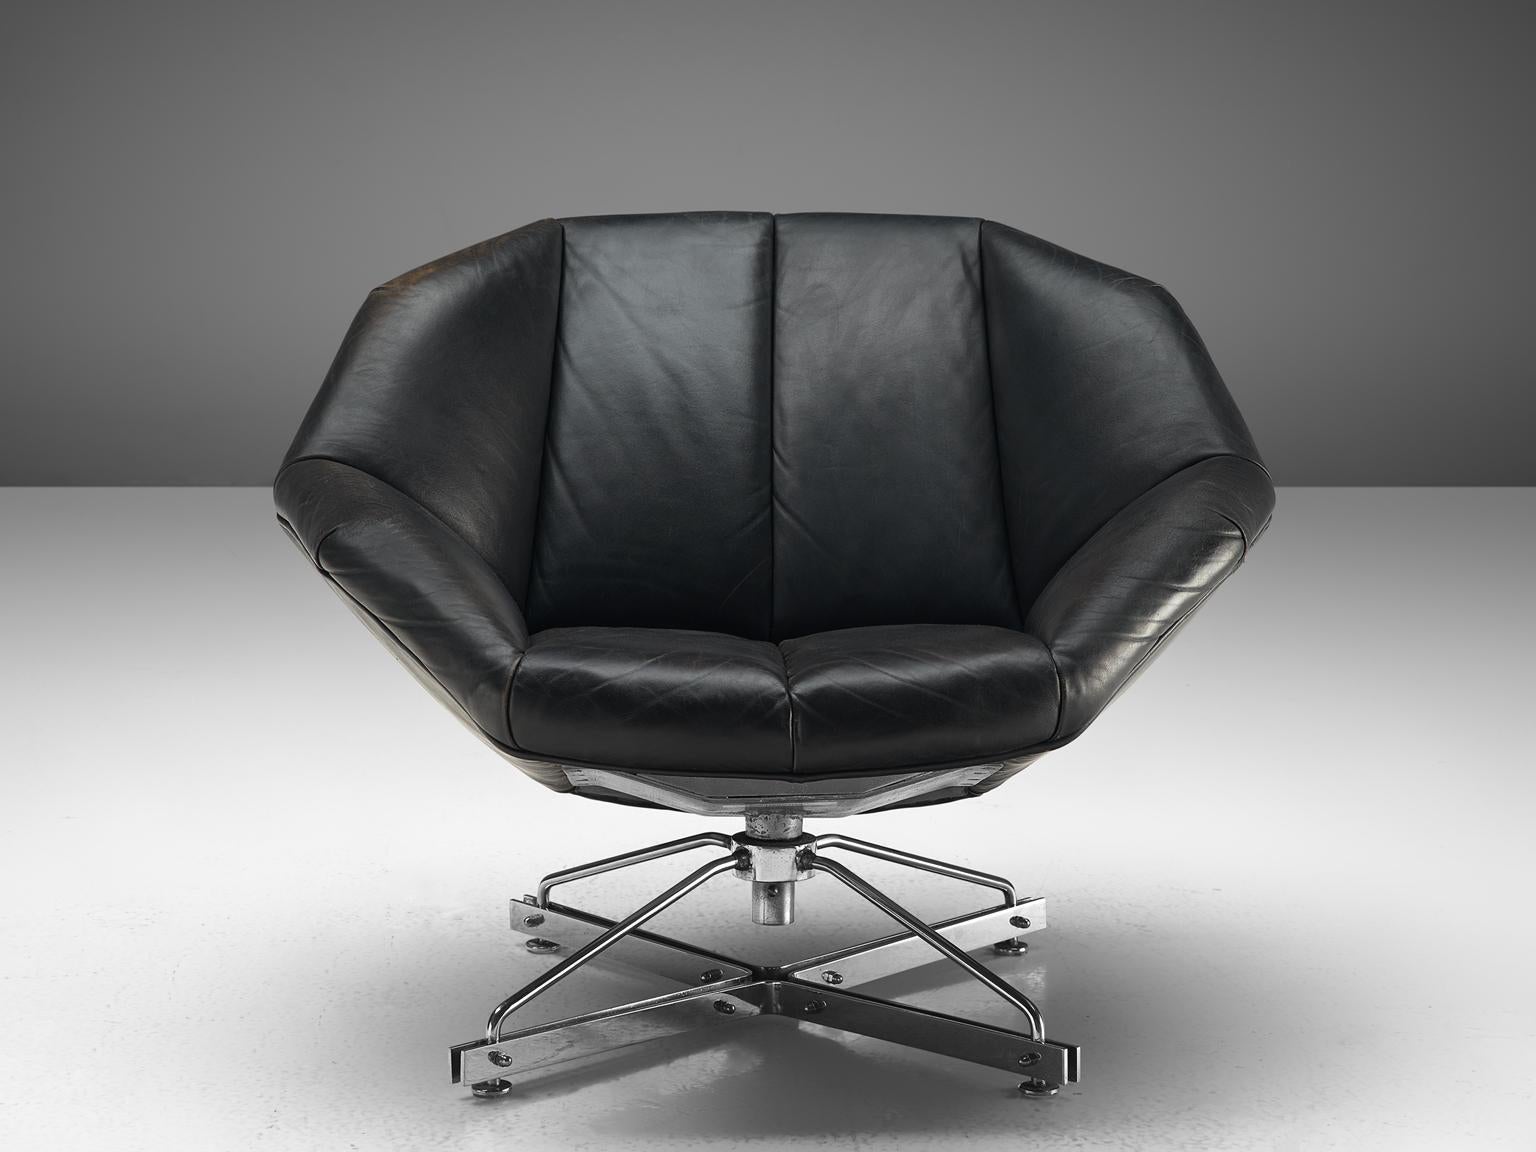 Mid-20th Century Italian Pair of Swivel Chairs in Black Leather